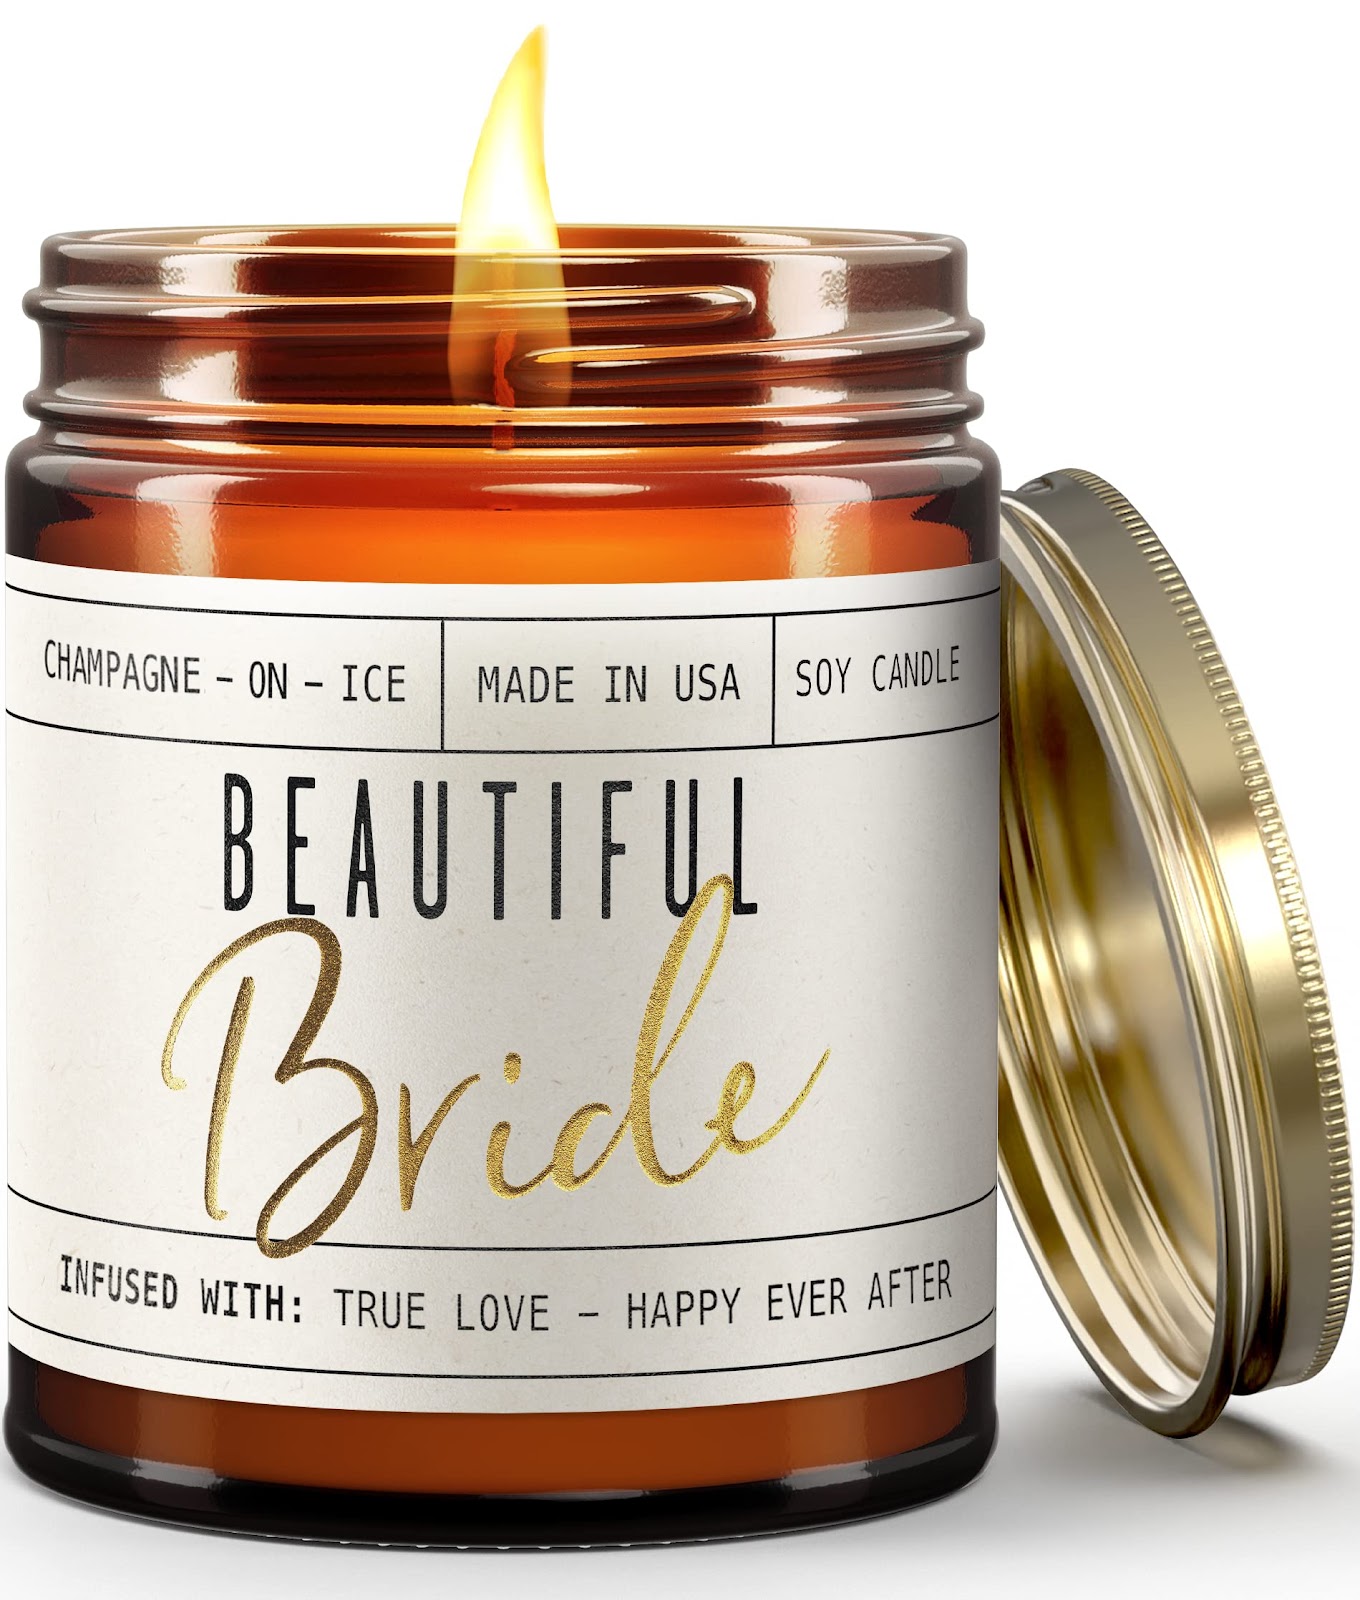 Bride to Be Gift, Bride Gift, Bridal Shower Gift, Badass Bride Soy Candle -  Bride, Bachelorette Gift for Her, Bride, Women - Engagement, Wedding Gifts